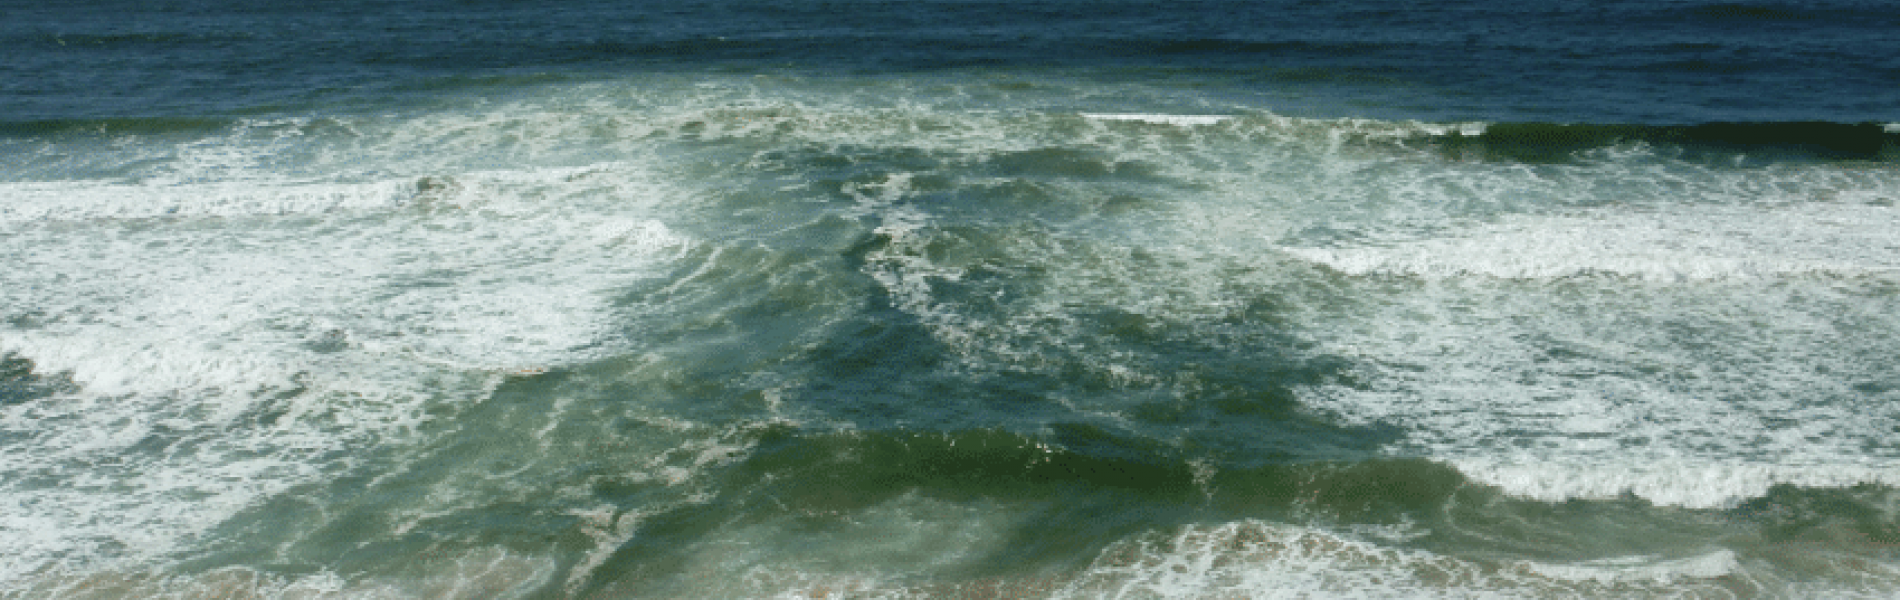 Picture of rip current